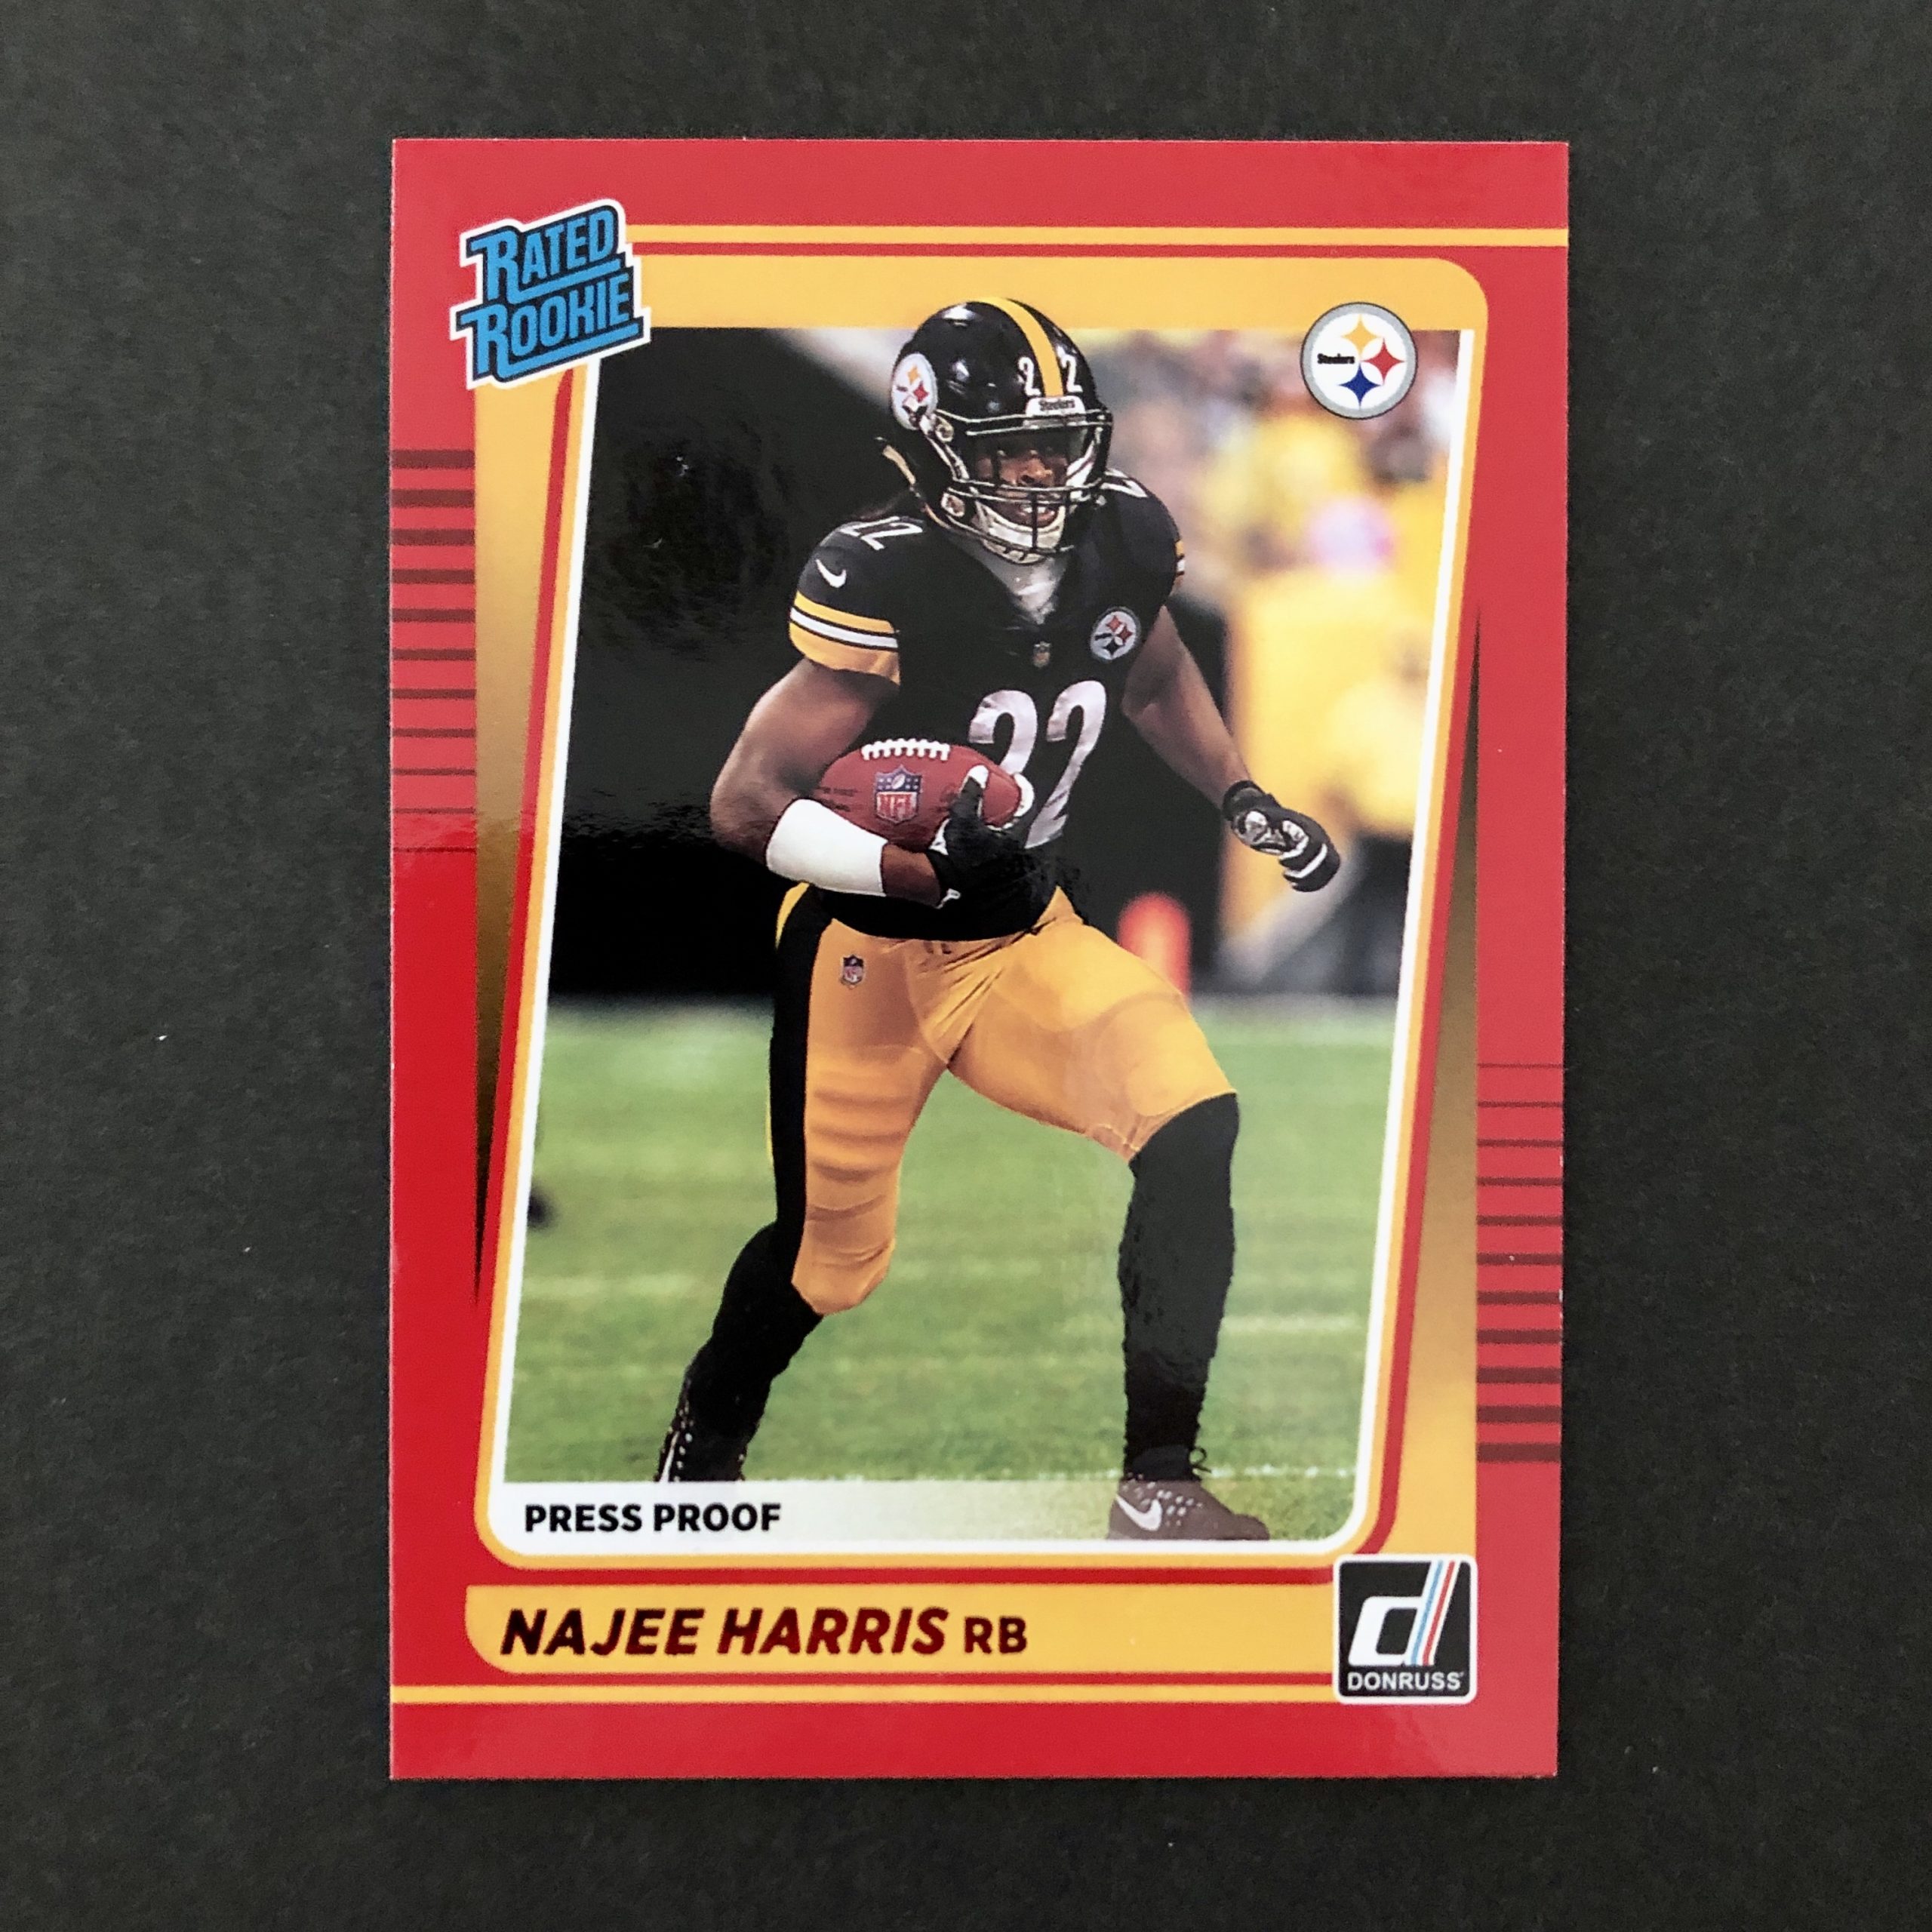 Najee Harris 2021 Donruss Red Press Proof Rated Rookie